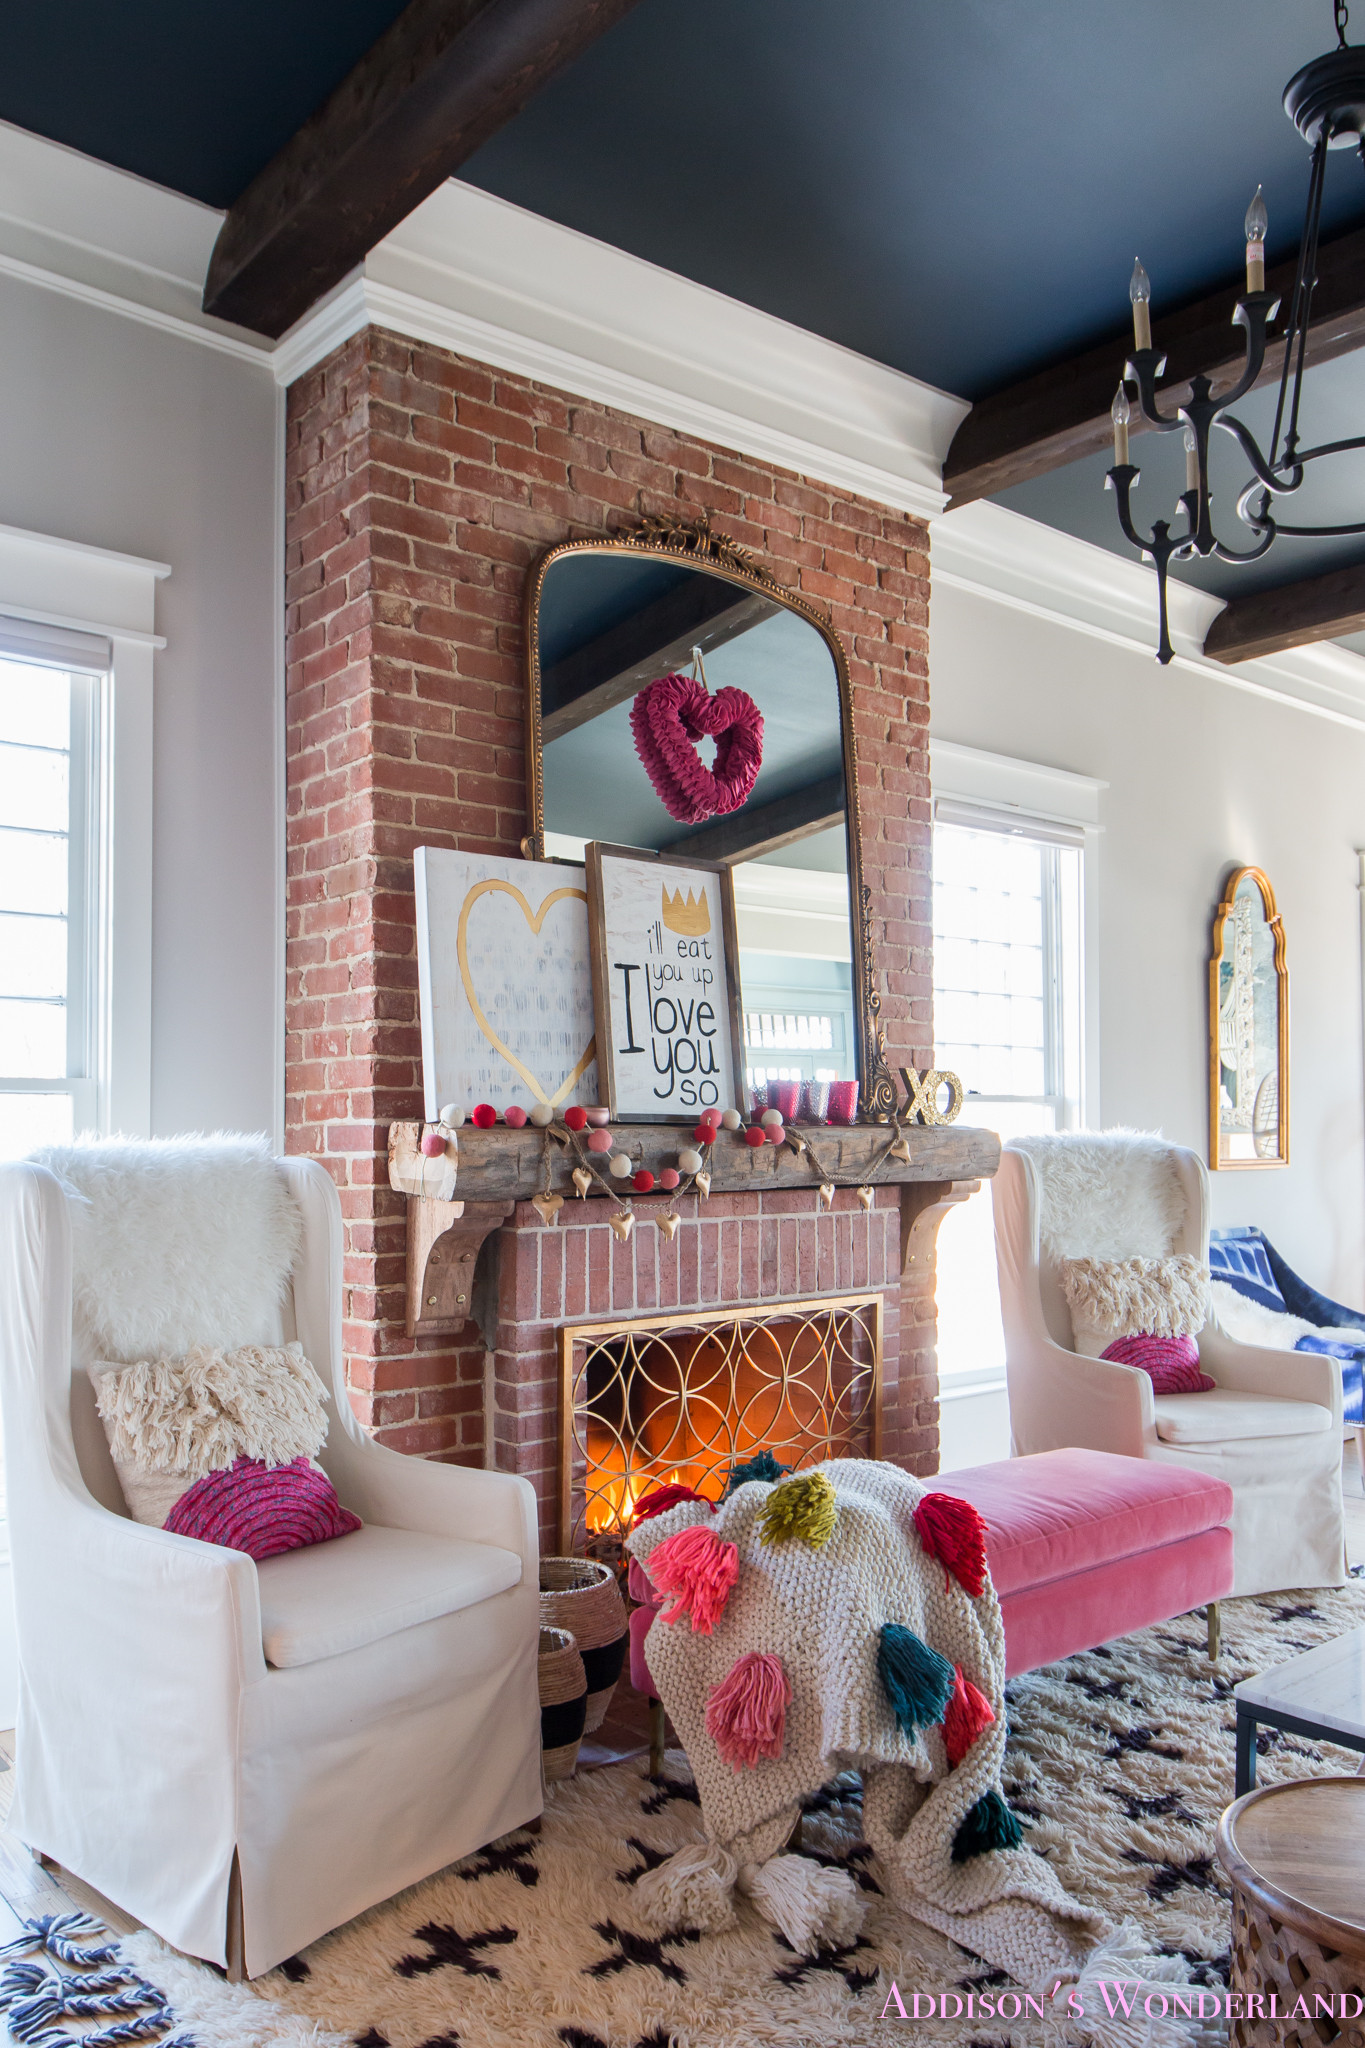 Decorating Ideas For Living Room
 Our Colorful Whimsical & Elegant Valentine s Day Living